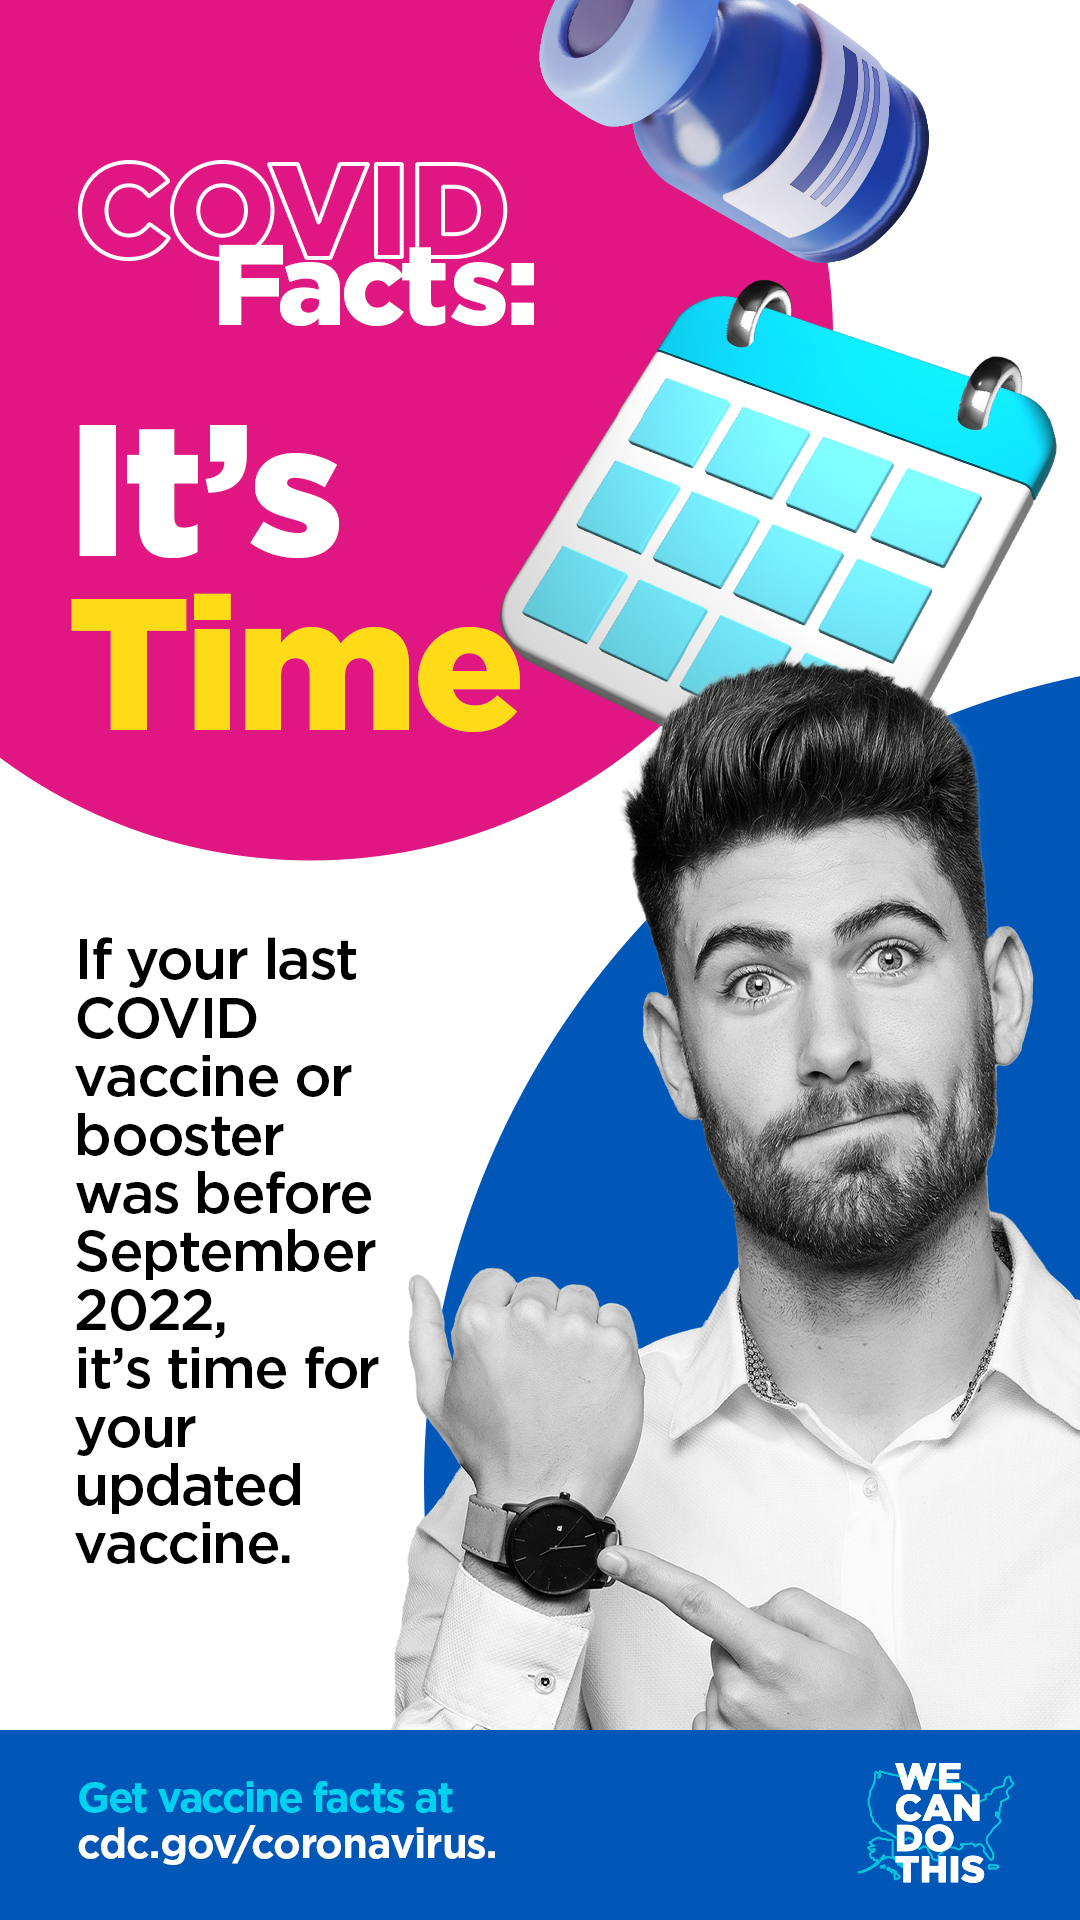 An adult man points to his watch. Text reads, "COVID Facts: It’s Time. If your last COVID vaccine or booster was before September 2022, it’s time for your updated vaccine. Get vaccines facts at cdc.gov/coronavirus"